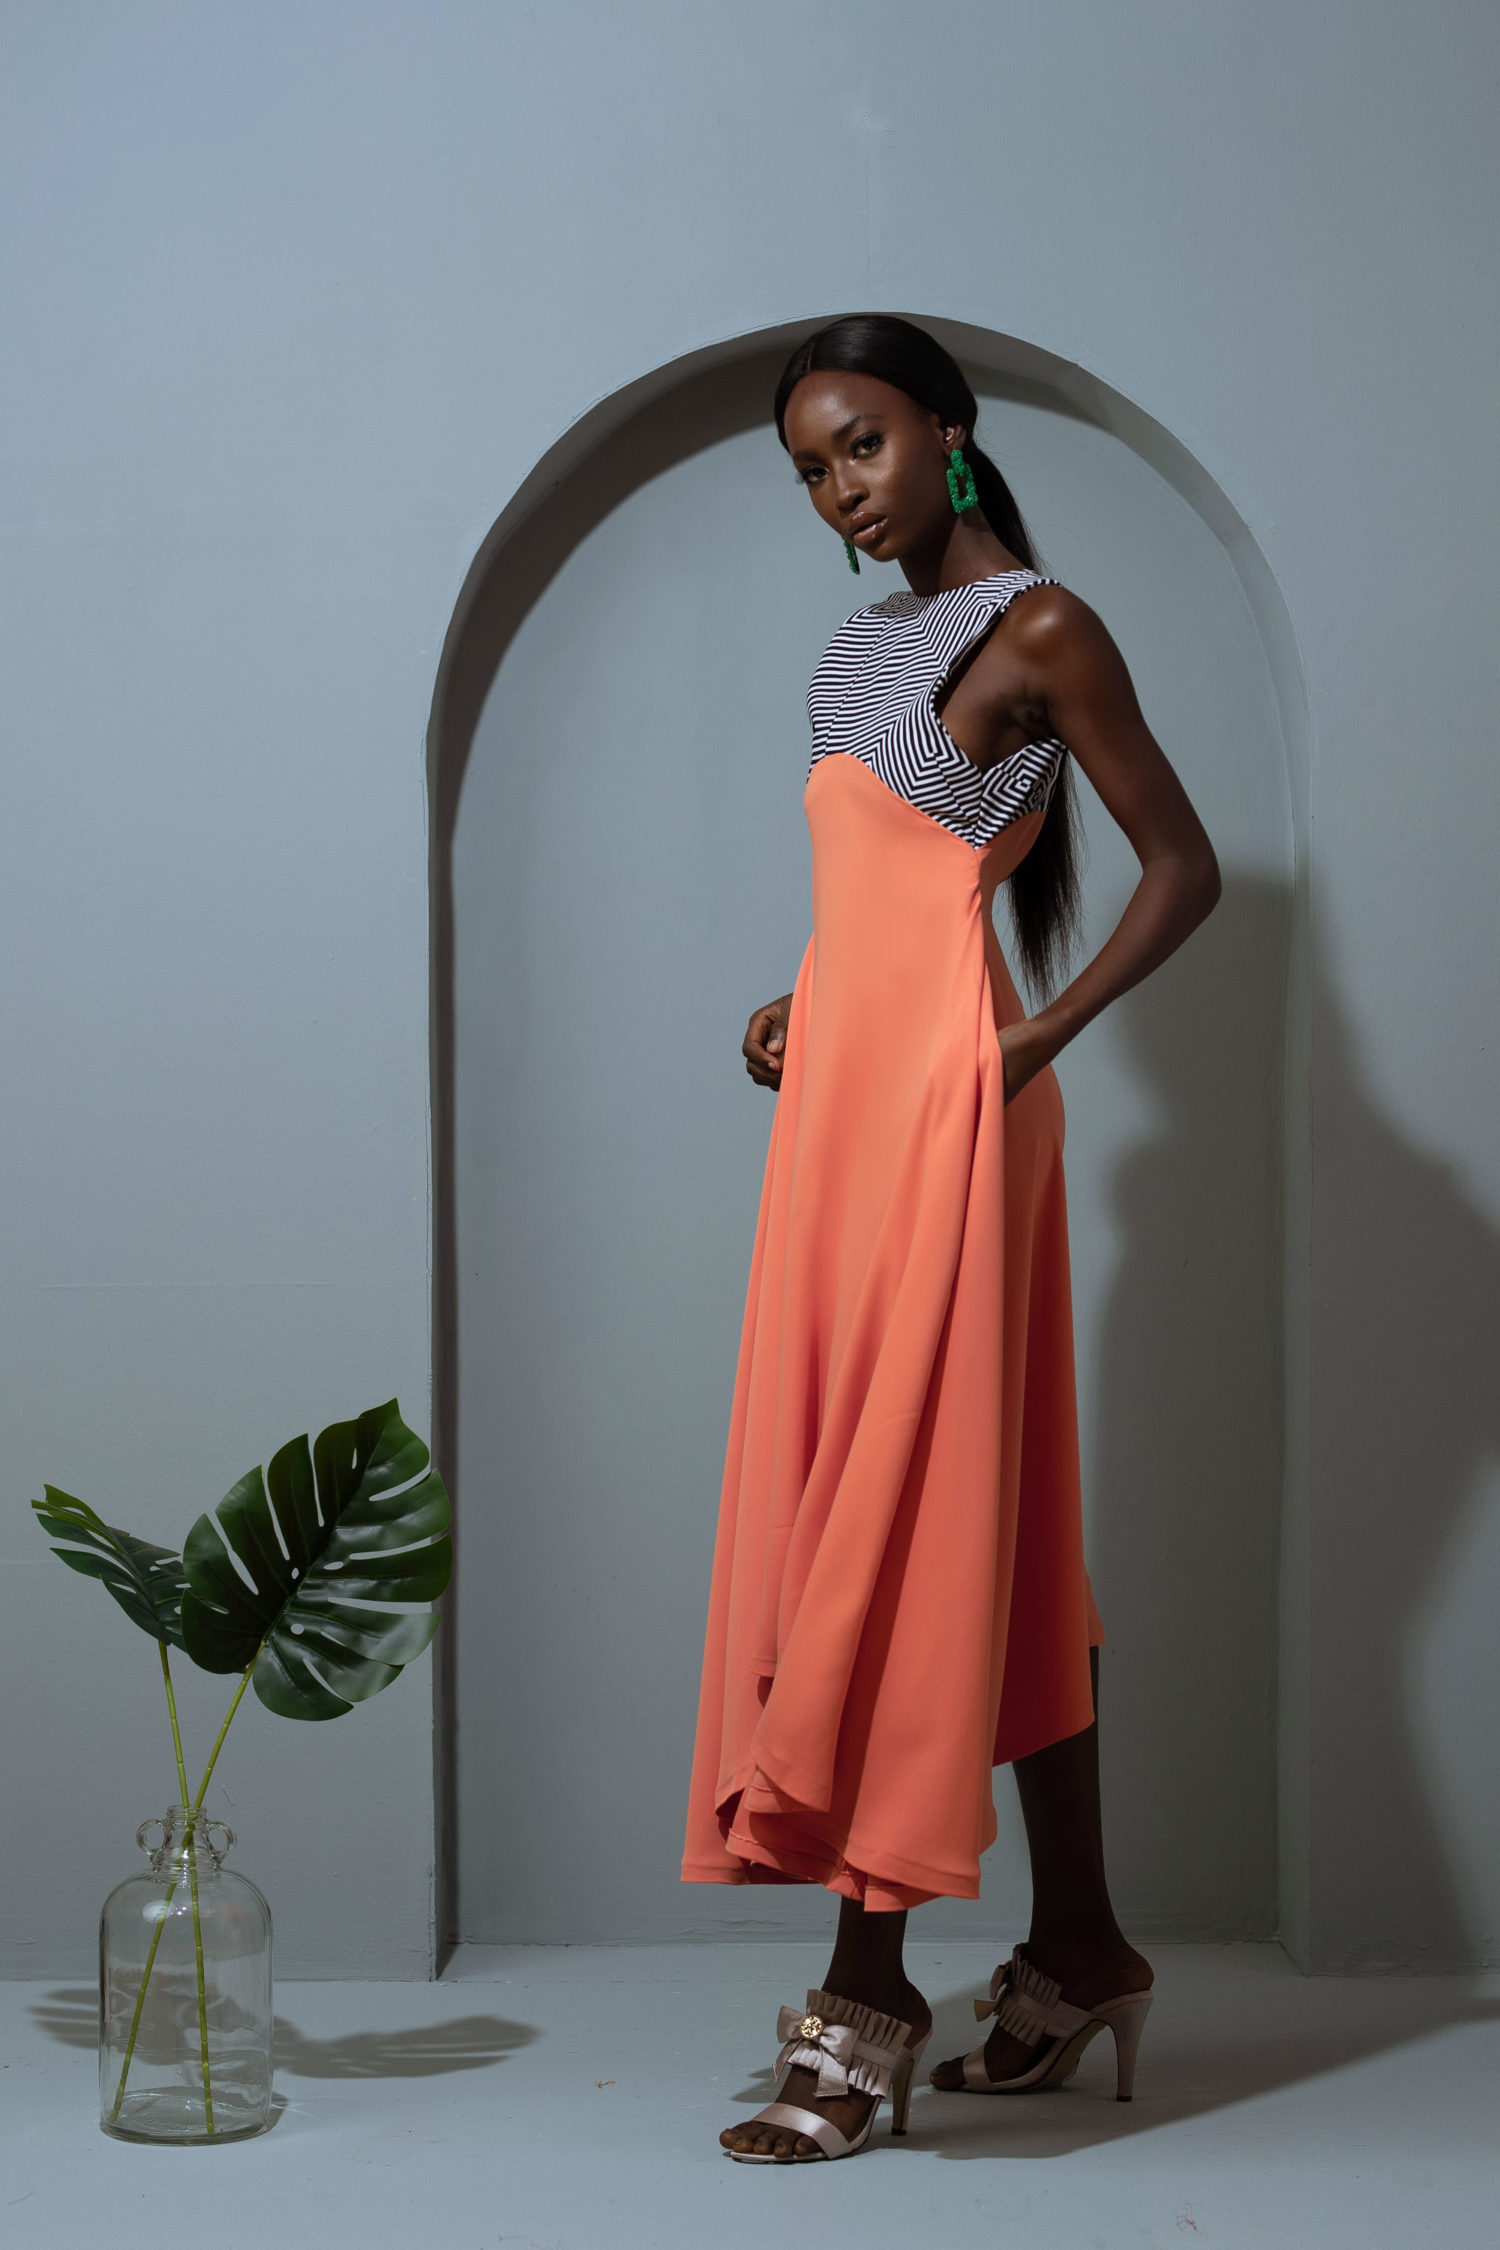 Prepare To Completely Obsess Over Knanfe’s New Collection “Beatnik”